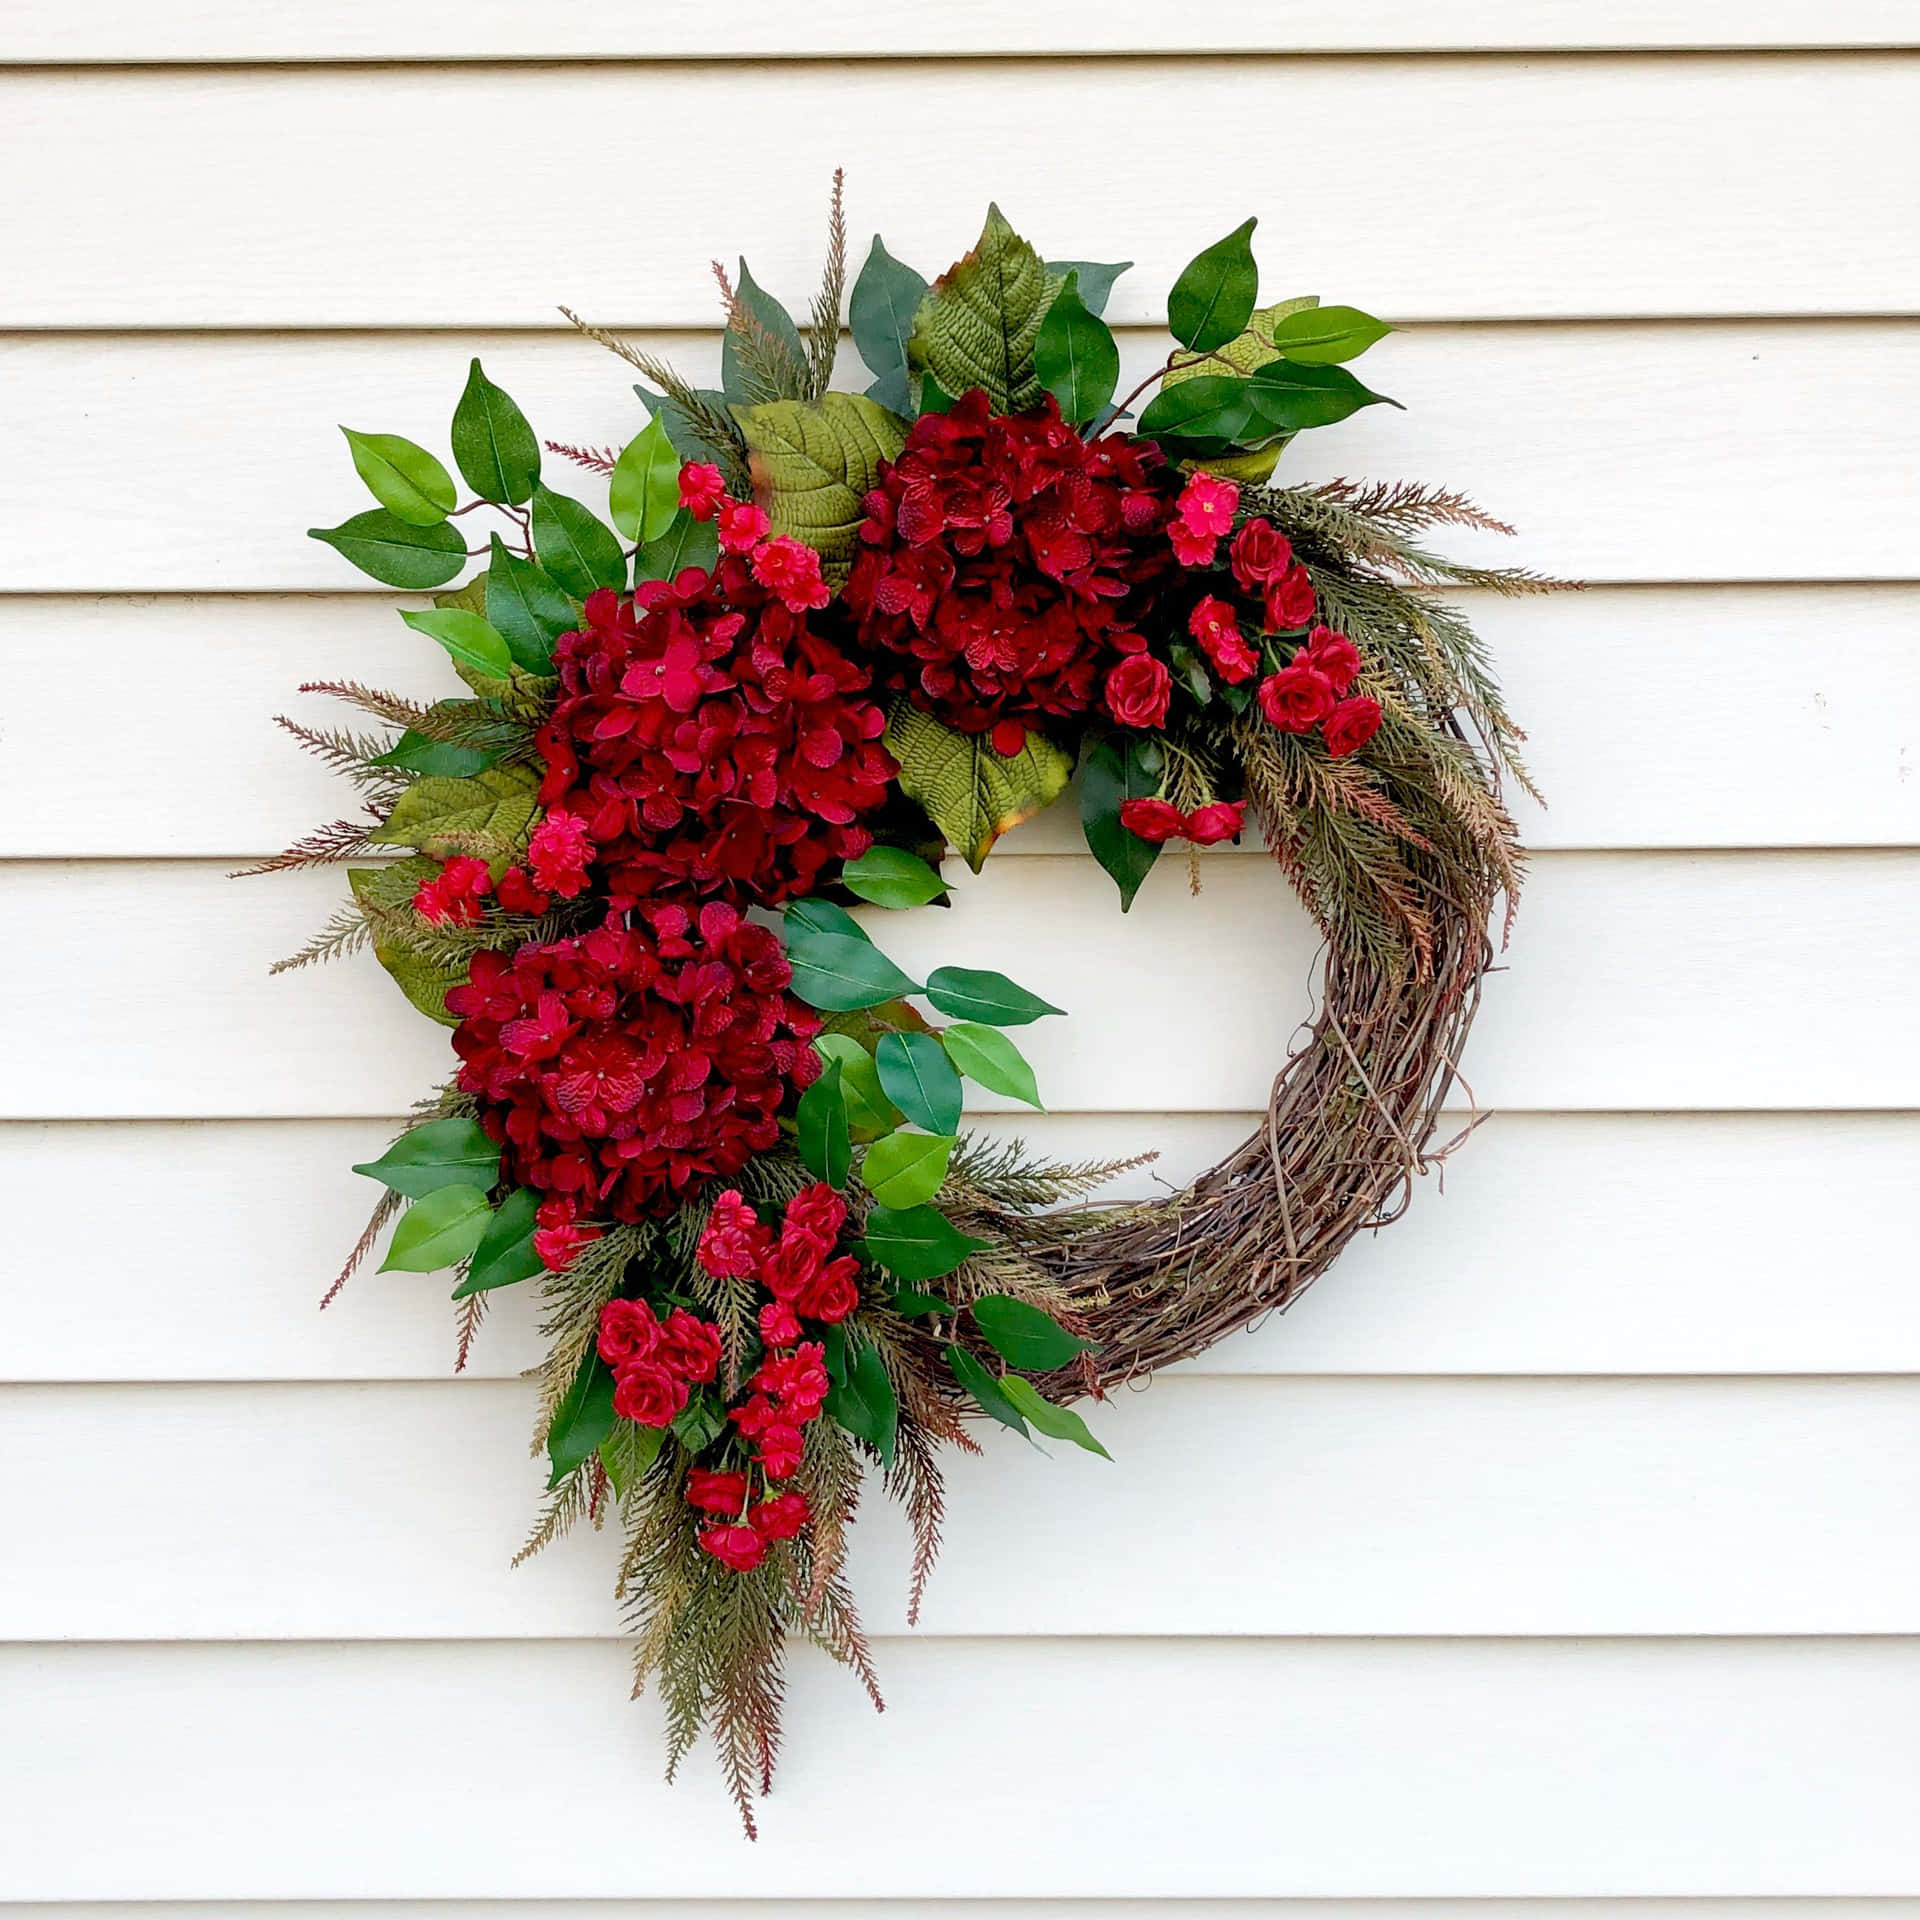 Caption: Beautifully Crafted Spring Wreath on a Wooden Door Wallpaper